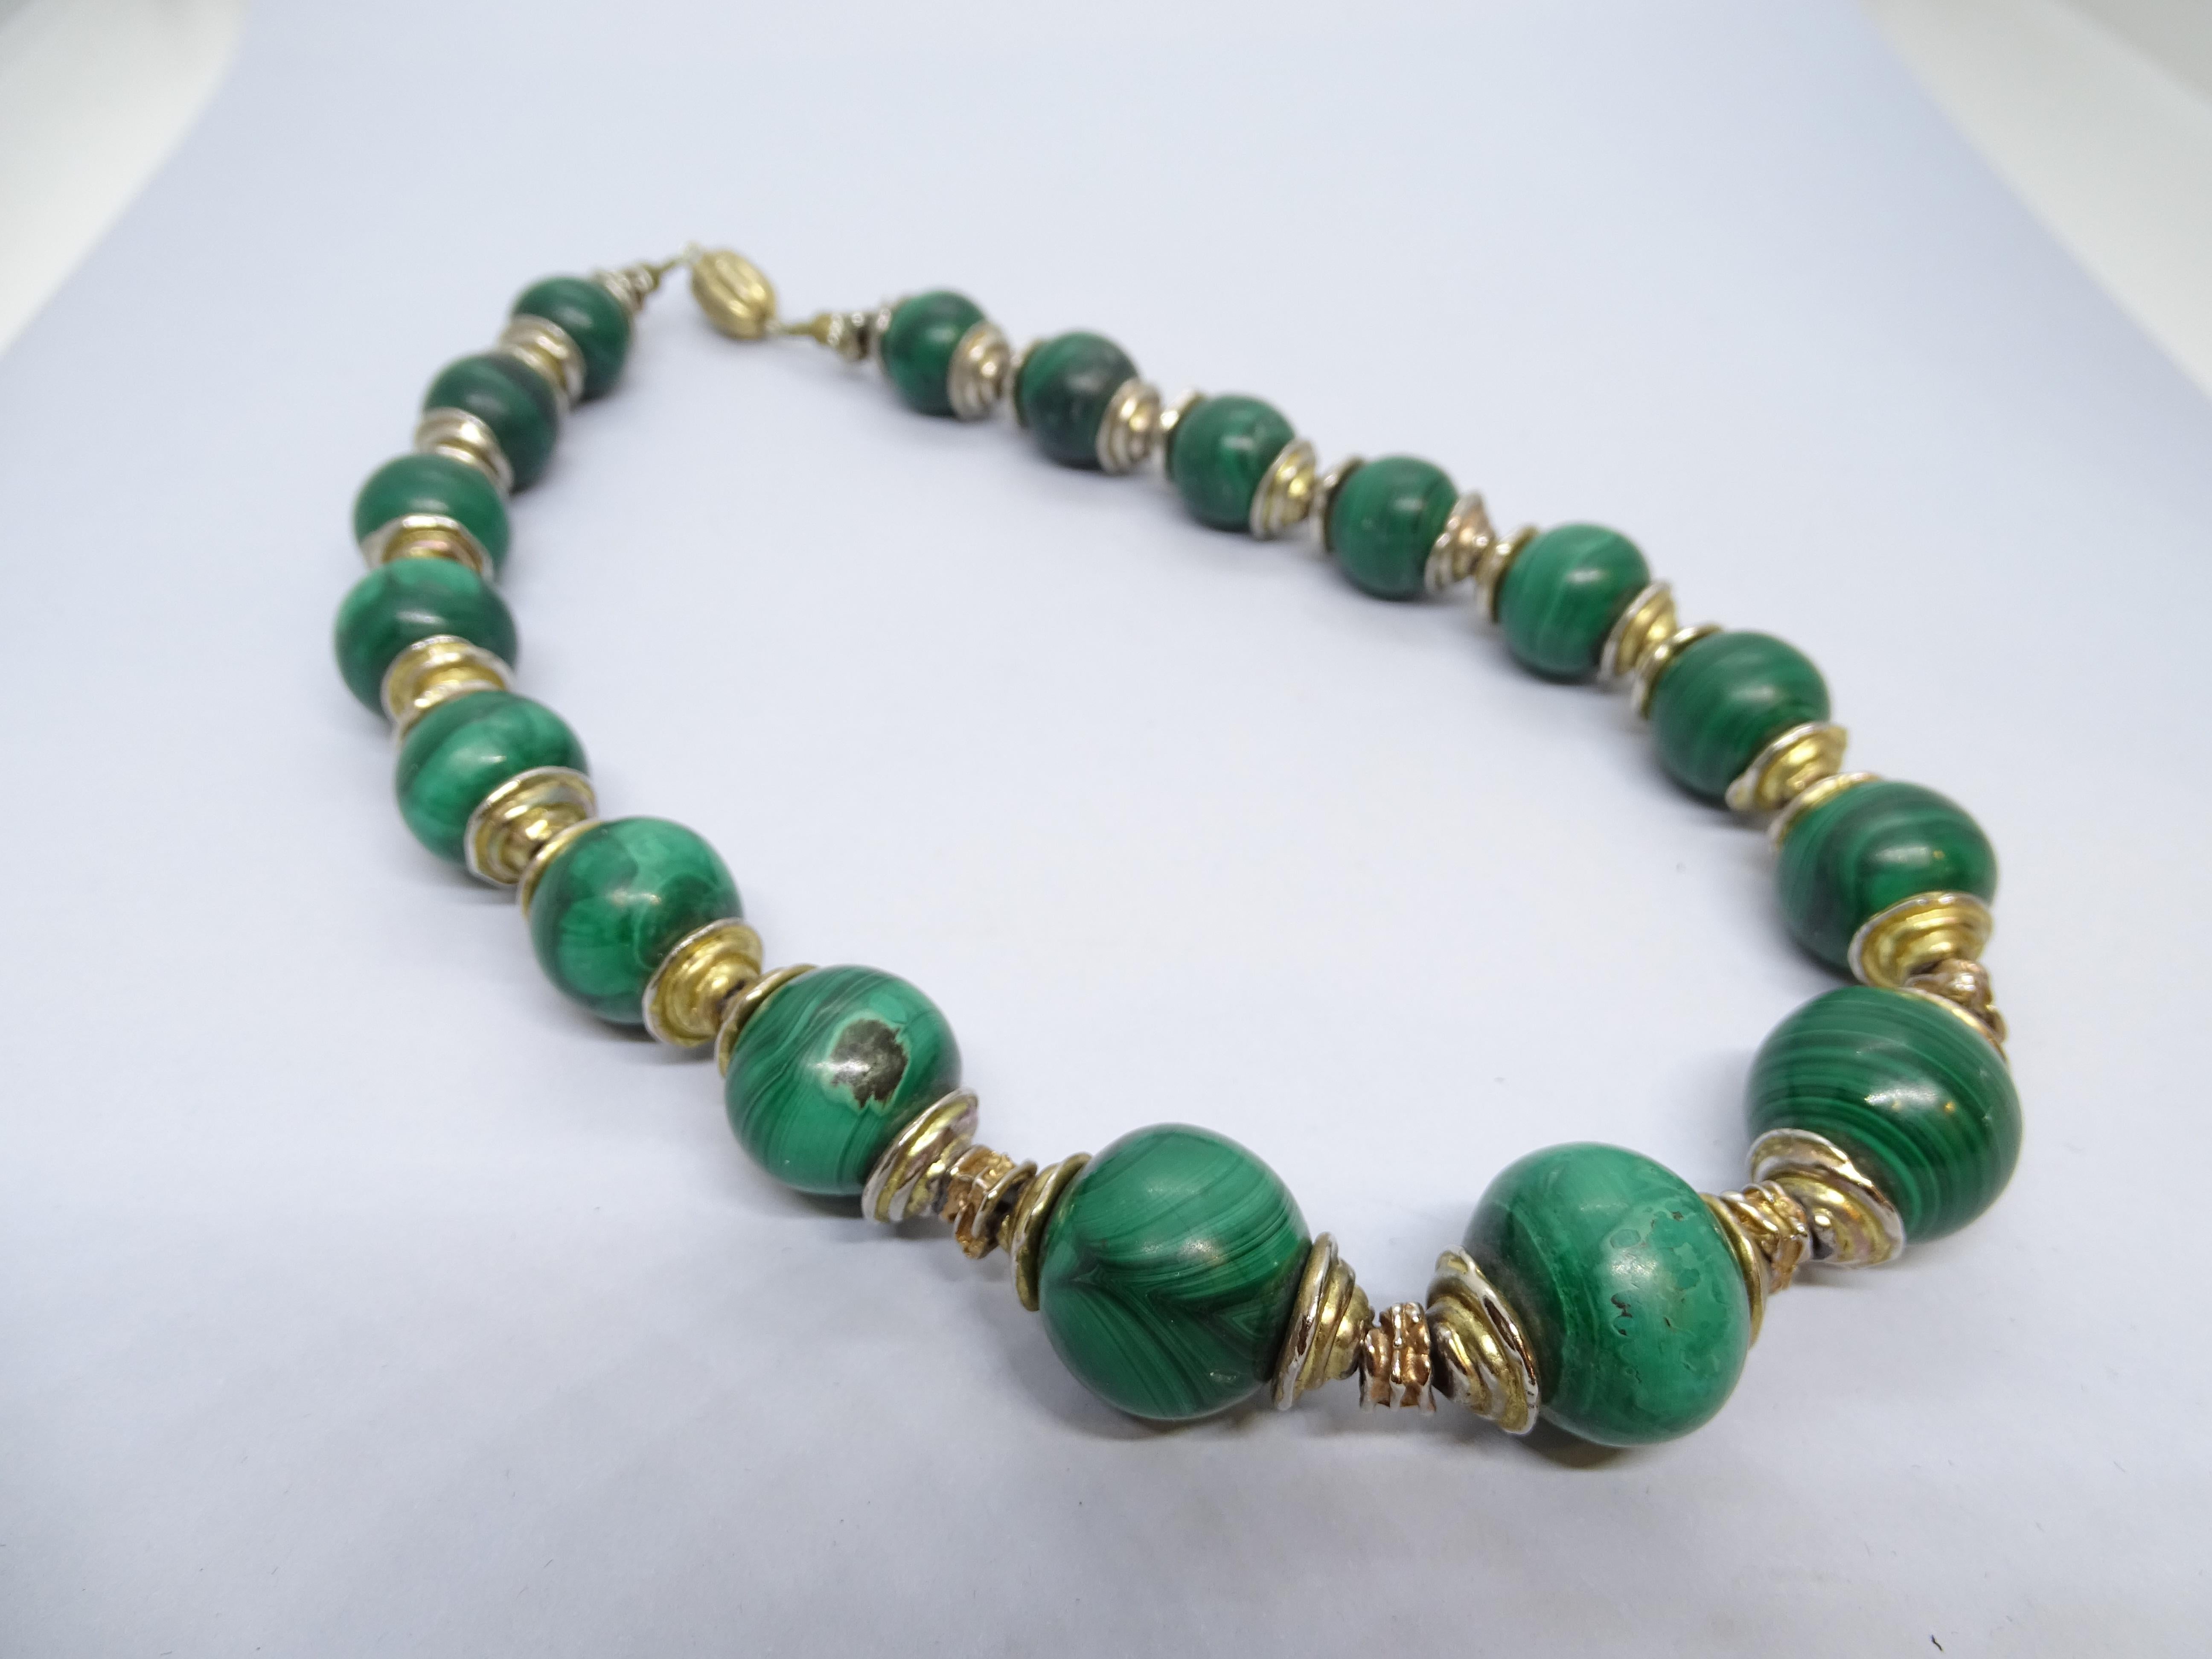 Very Beautiful French necklace with malachite balls  set in gold-plated metal. Clasp or screw closure.
Vintage French fine jewelry necklace from the 70s, in very good condition for its age and use. Beautiful green color with the characteristic veins